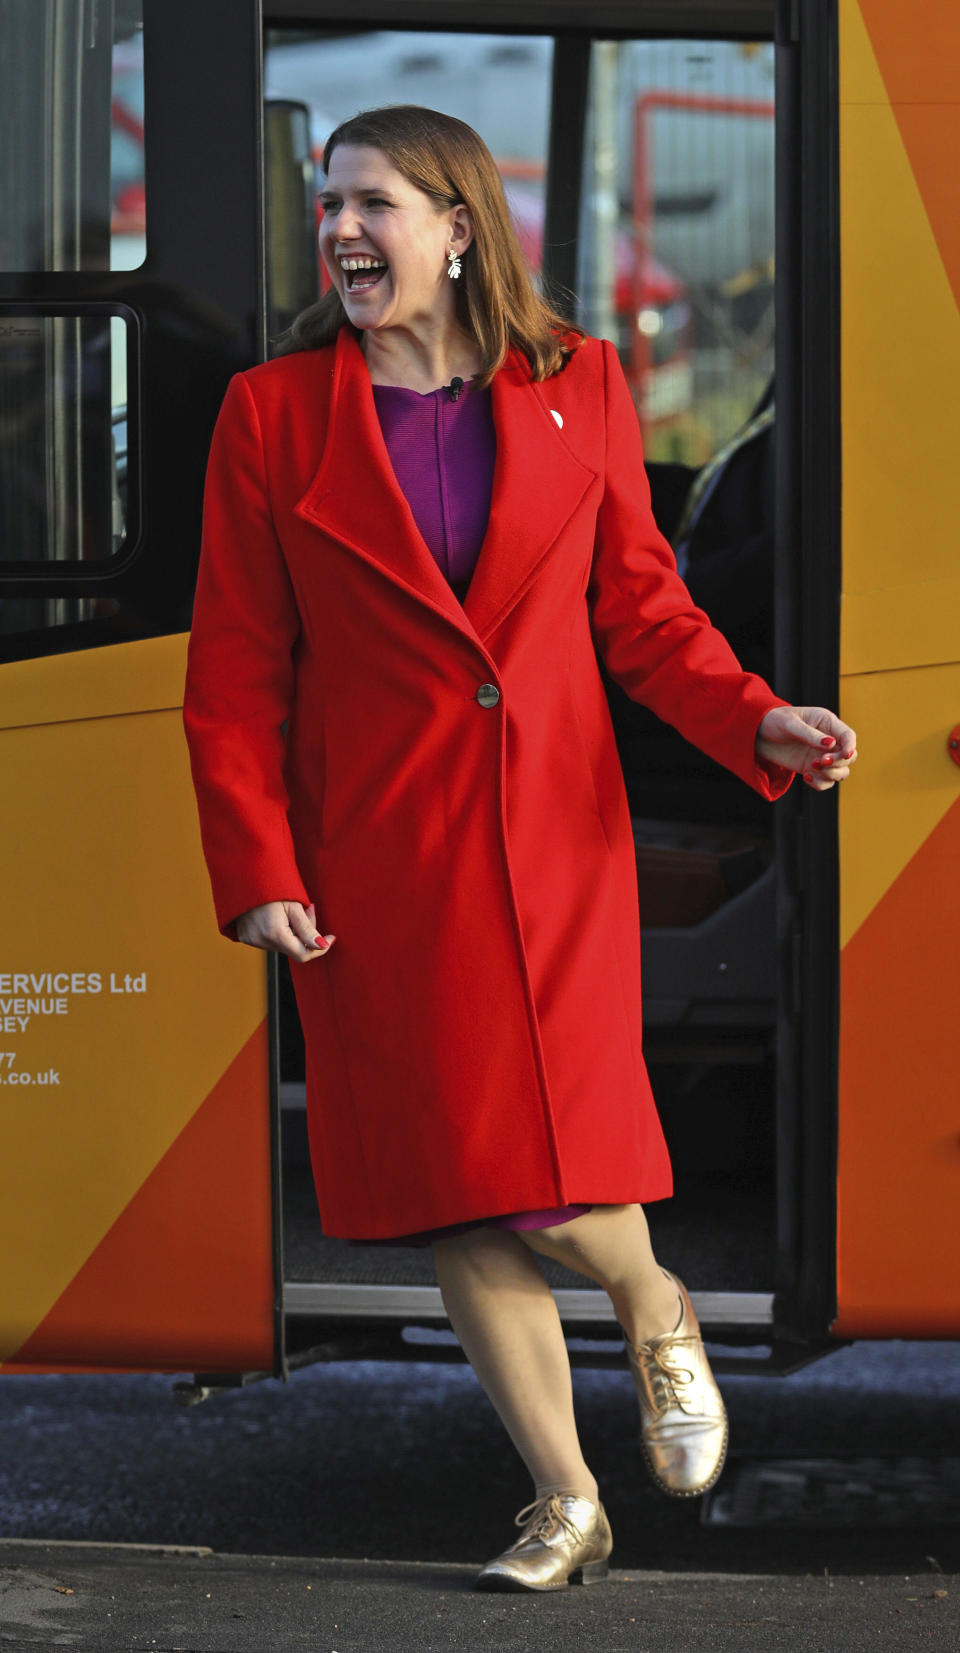 Liberal Democrat leader Jo Swinson arrives for a visit to Imagination Technologies in St Albans whilst on the General Election campaign trail, in England, Monday, Nov. 18, 2019. The leaders of Britain’s three biggest national political parties were making election pitches Monday to business leaders who are skeptical of politicians’ promises after years of economic uncertainty over Brexit. (Aaron Chown/PA via AP)